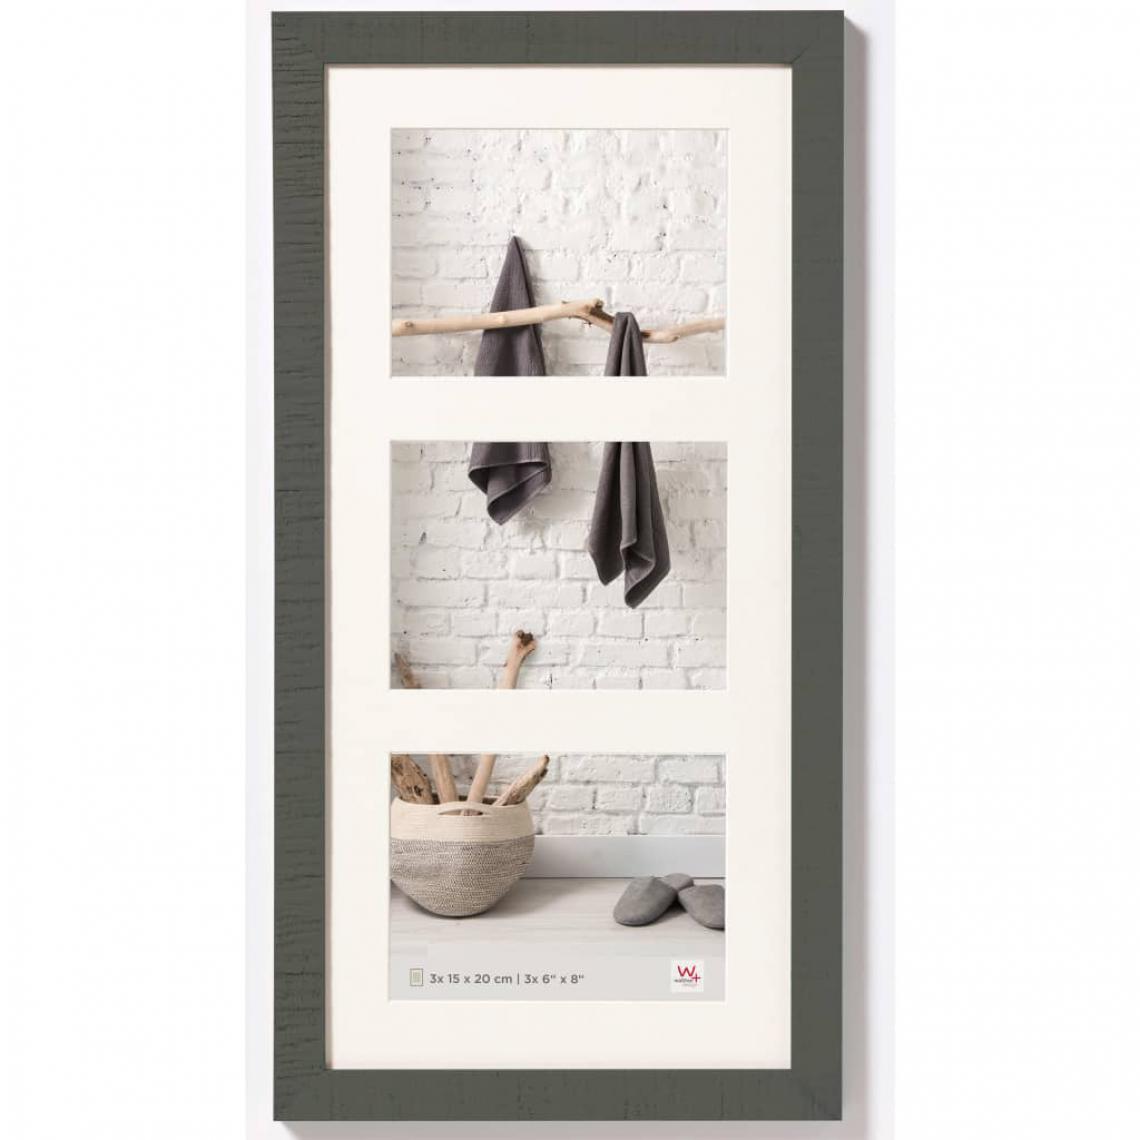 Walther - Walther Design Cadre photo Home 3x15x20 cm Gris - Cadres, pêle-mêle